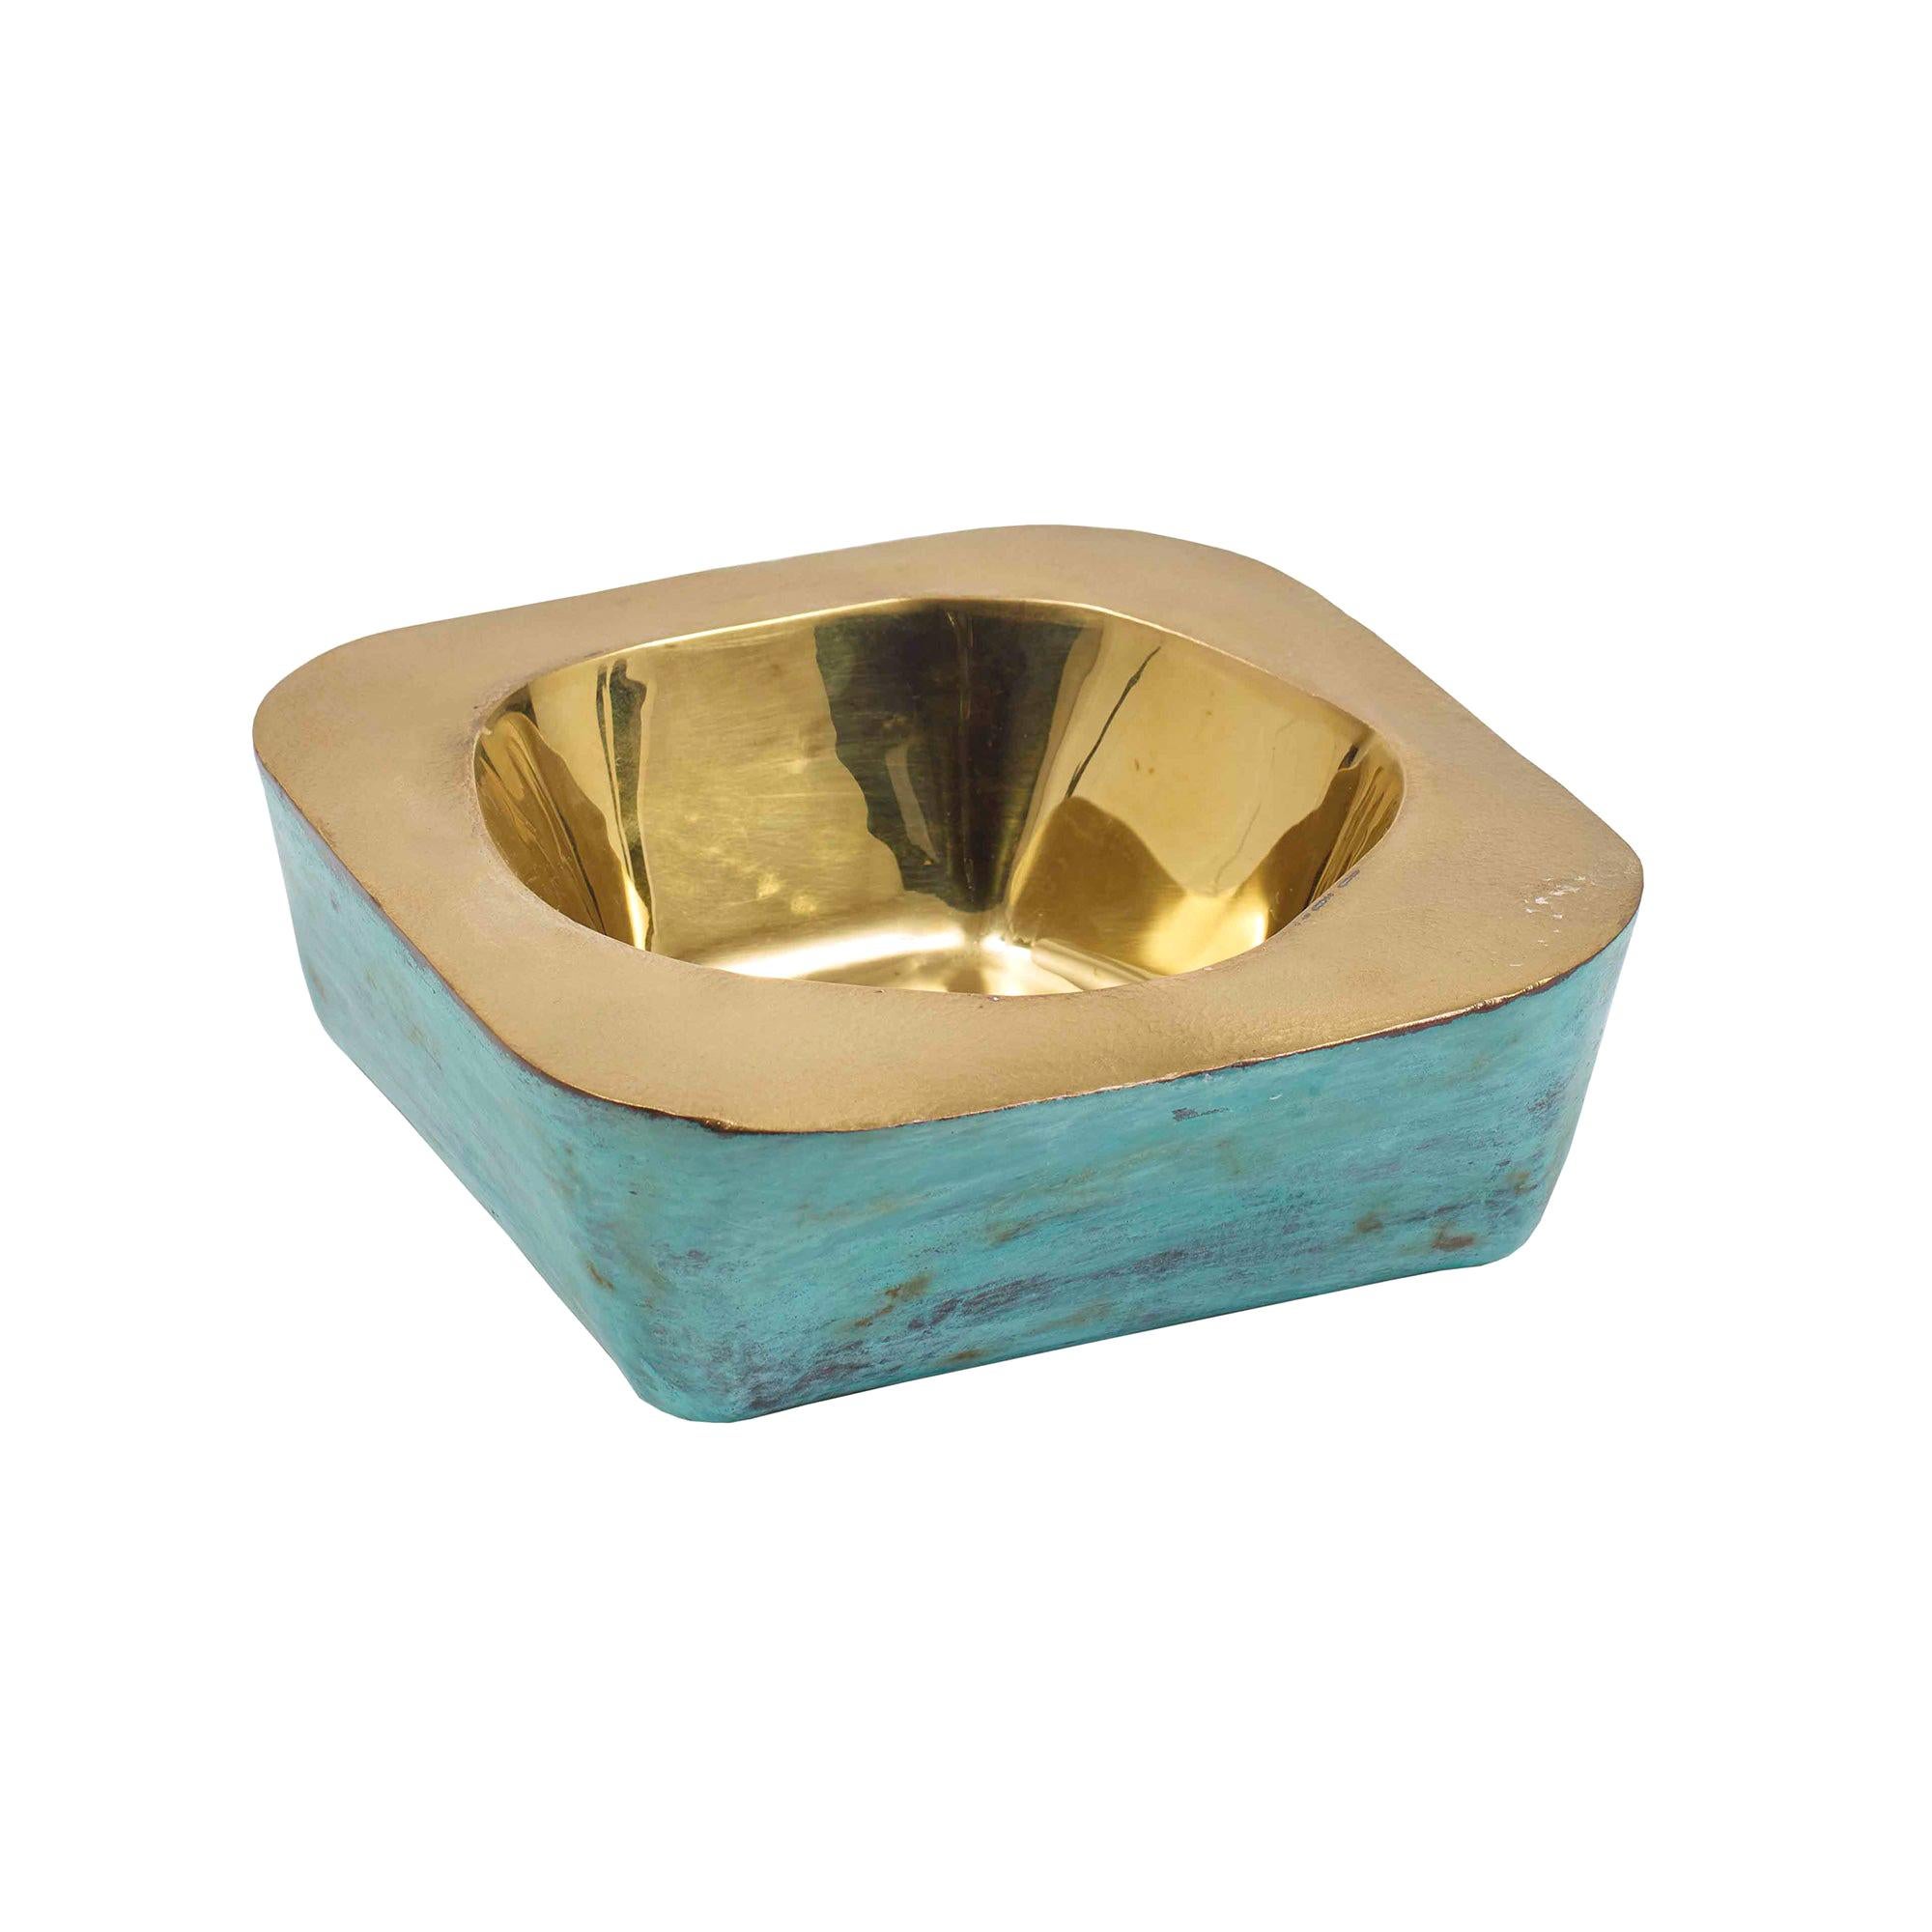 Audra Square Brass Bowl with Green Patina Finish by CuratedKravet